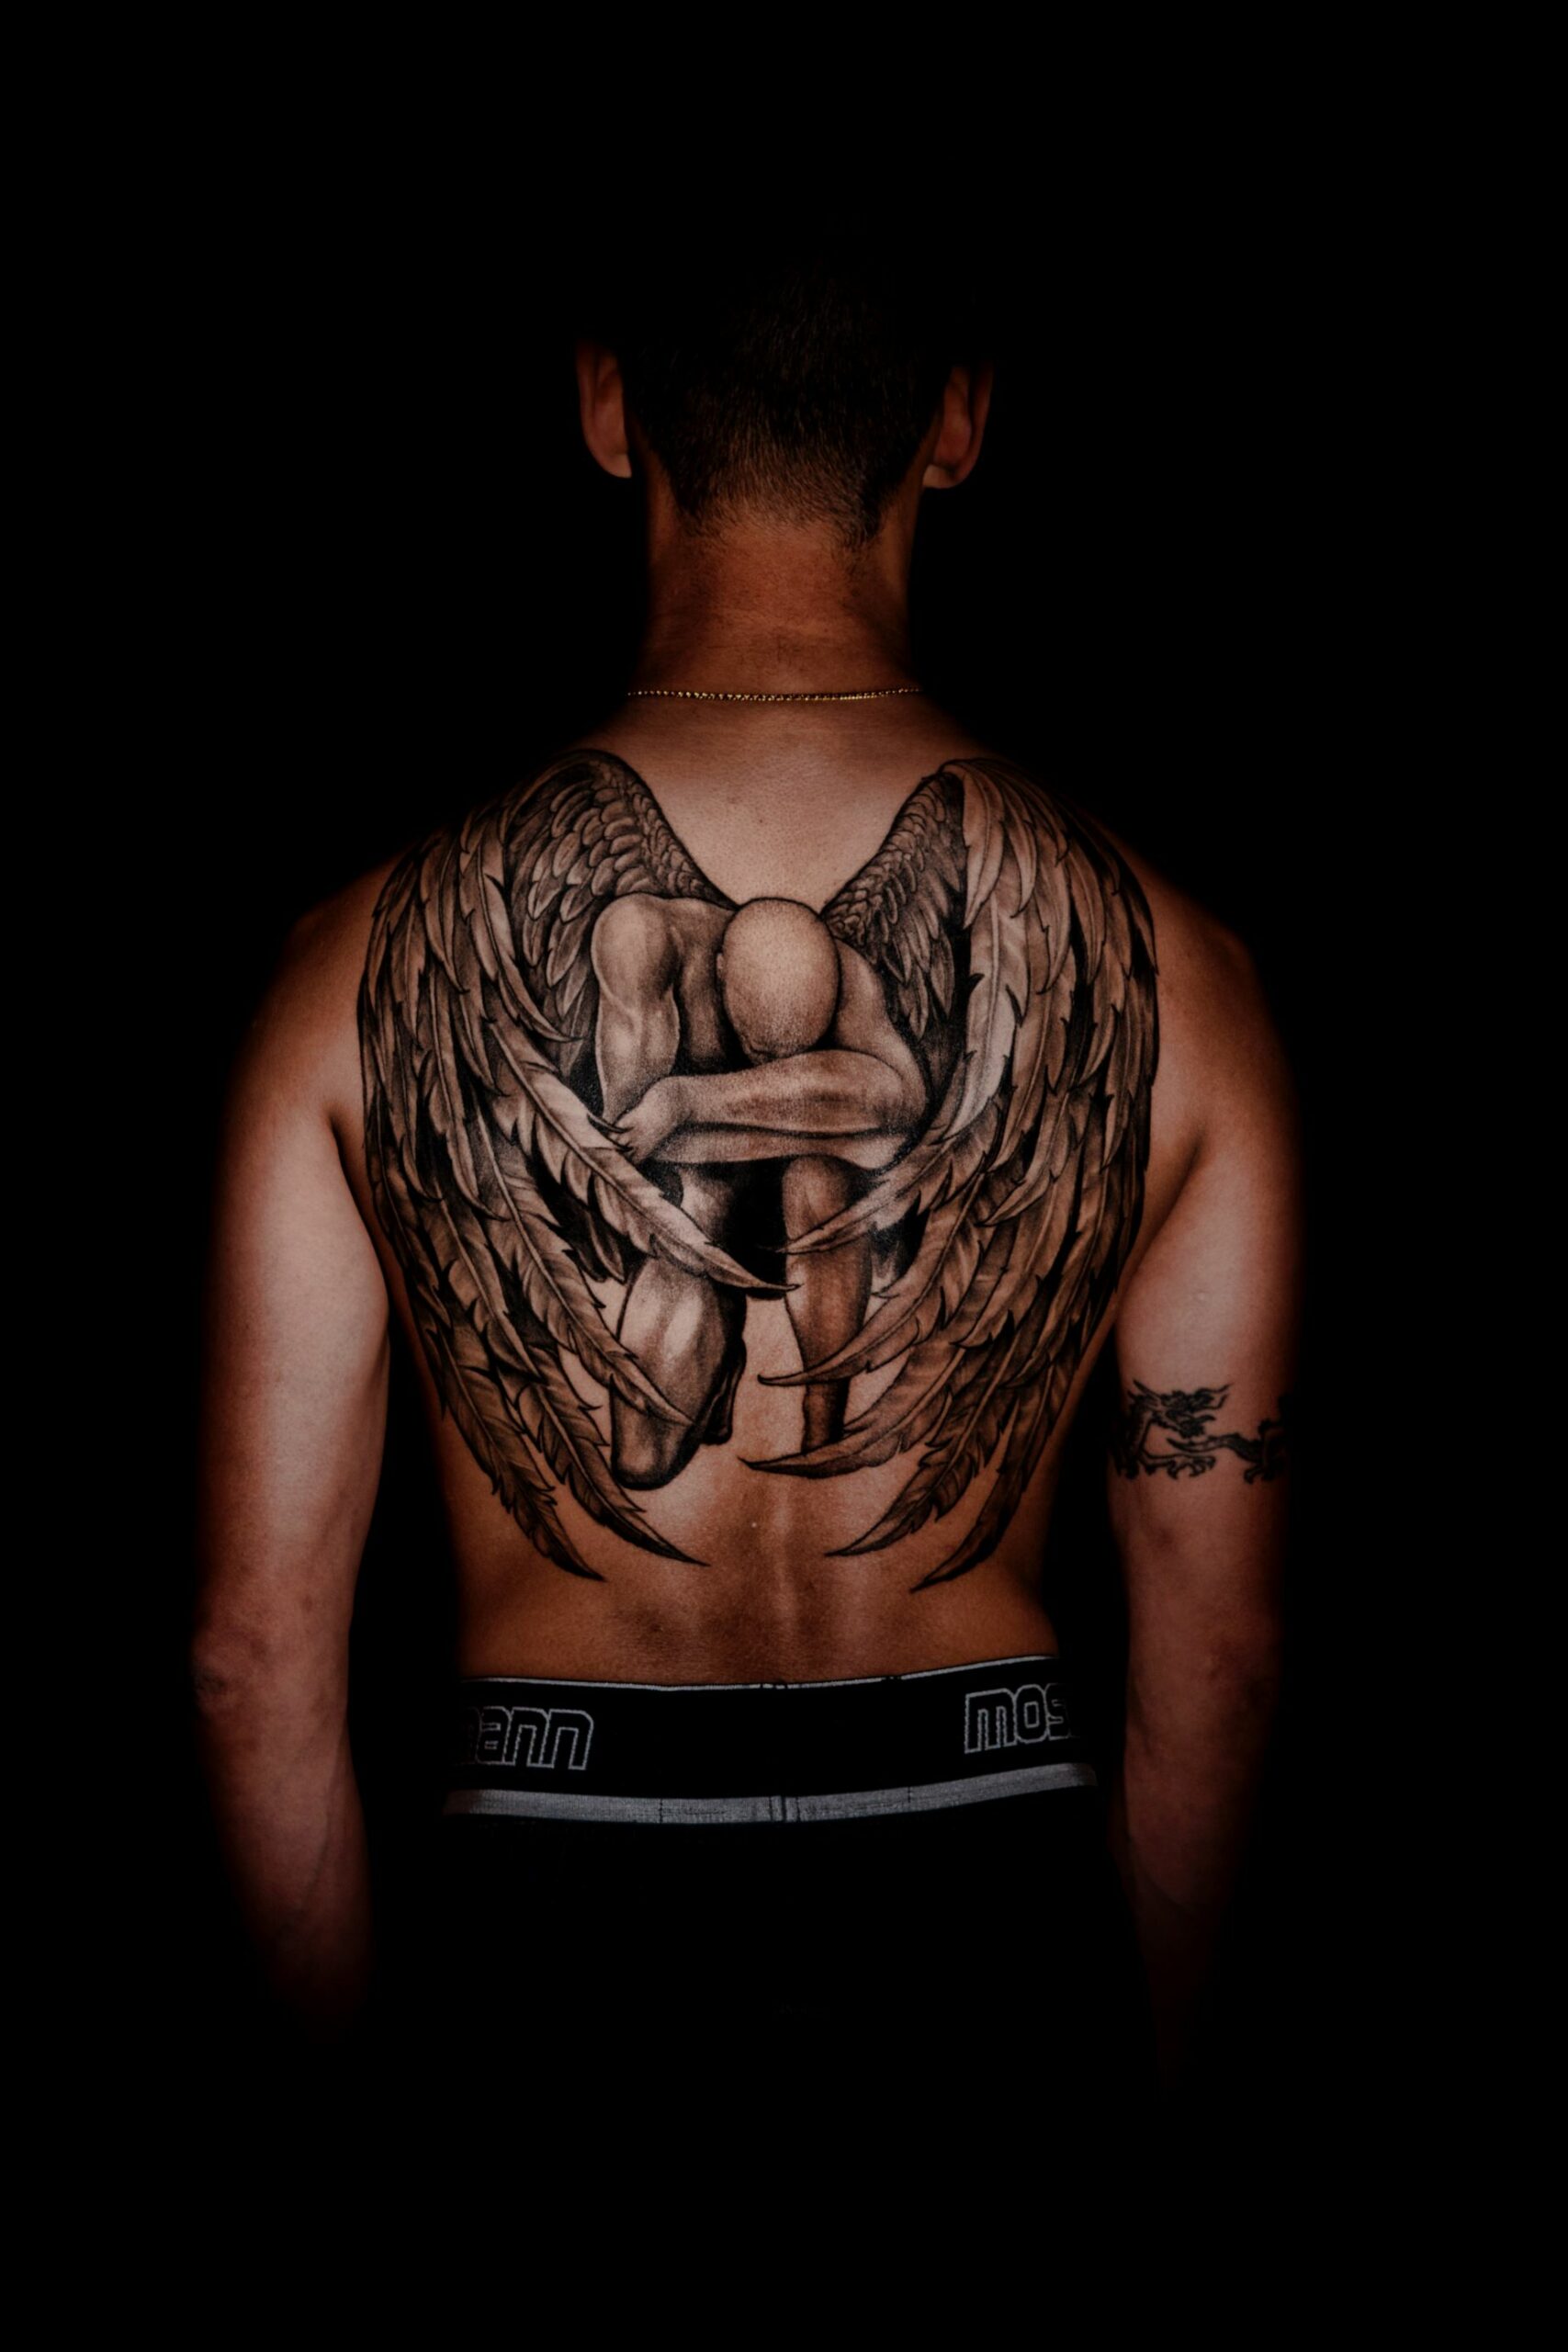 An image of a man's back with an angel and its large wings.